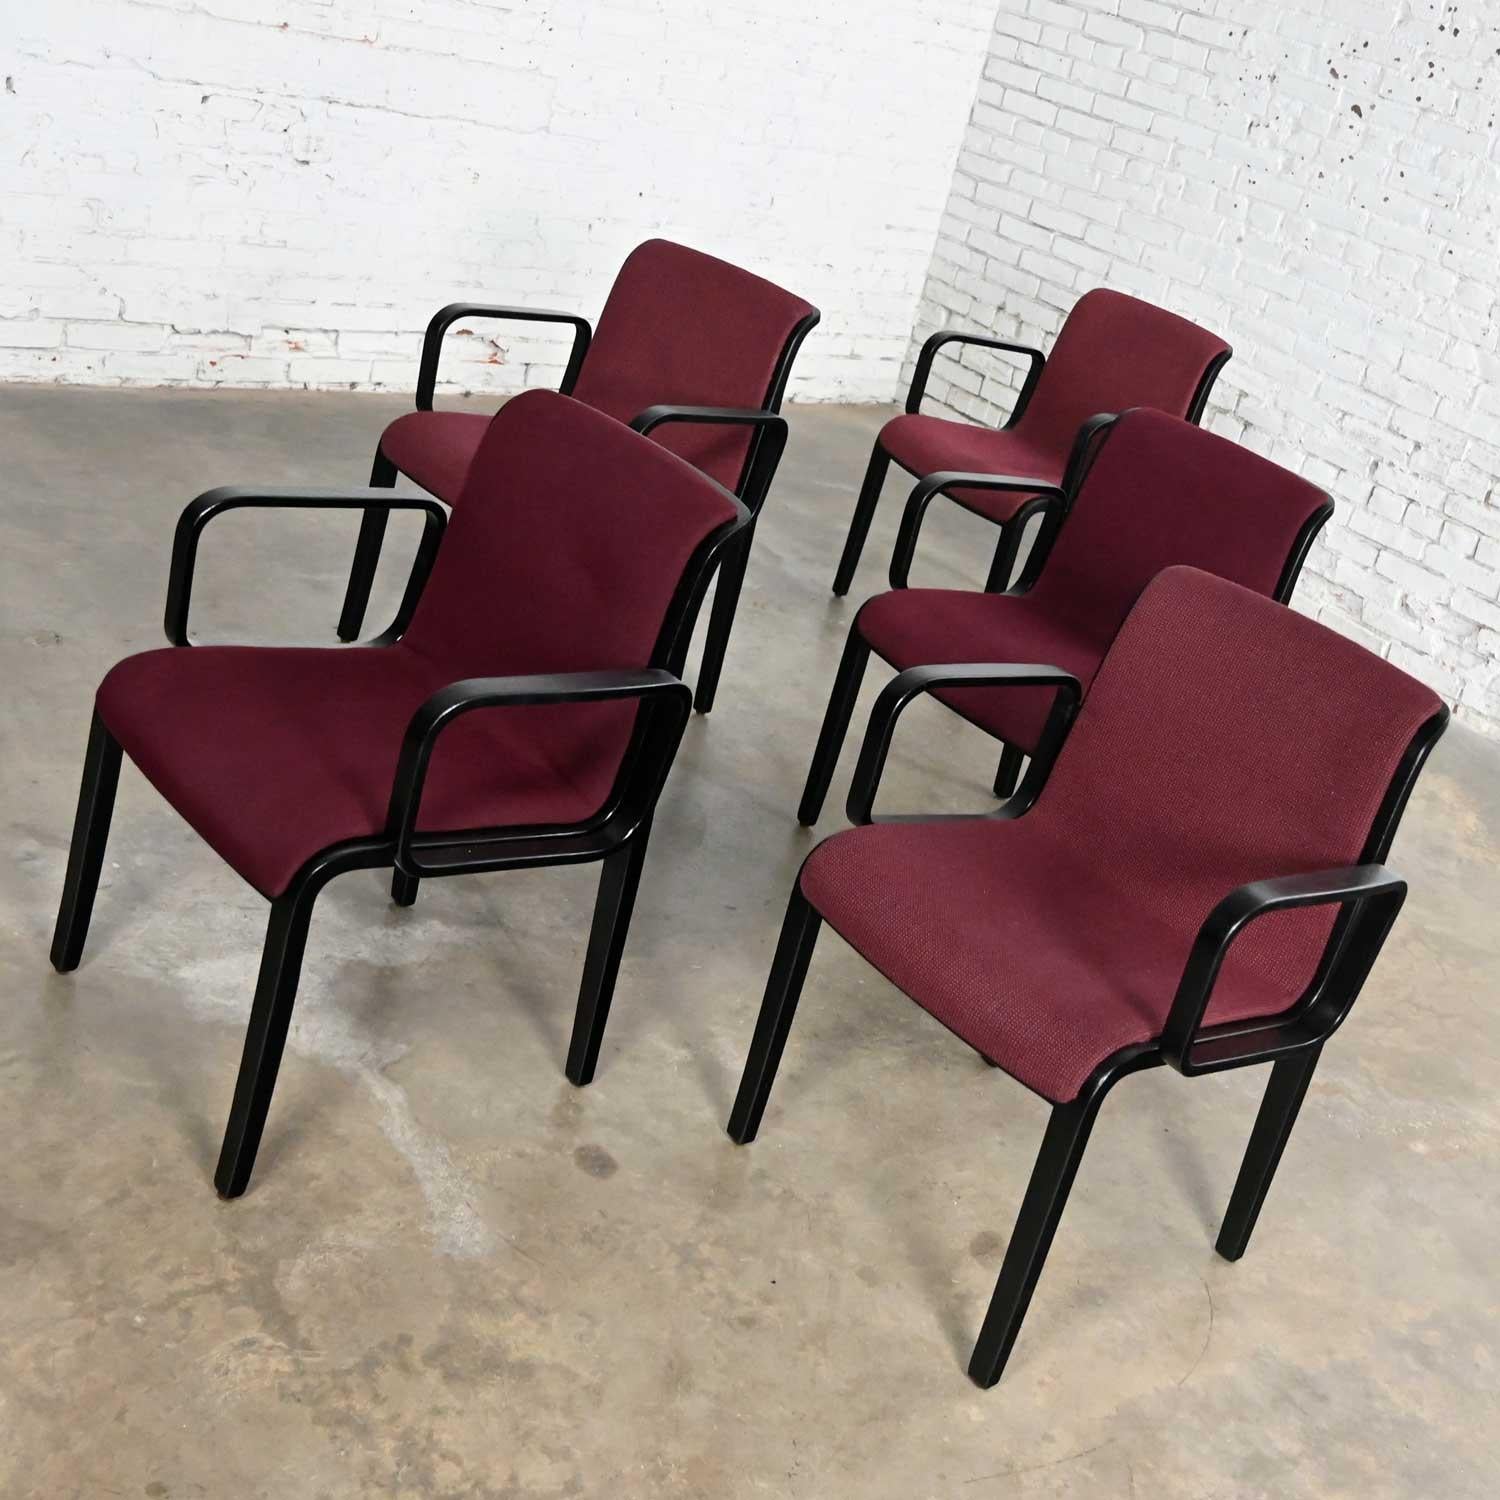 5 Knoll MCM Bentwood 1300 Series Dining Chairs Maroon & Black by Bill Stephens For Sale 9